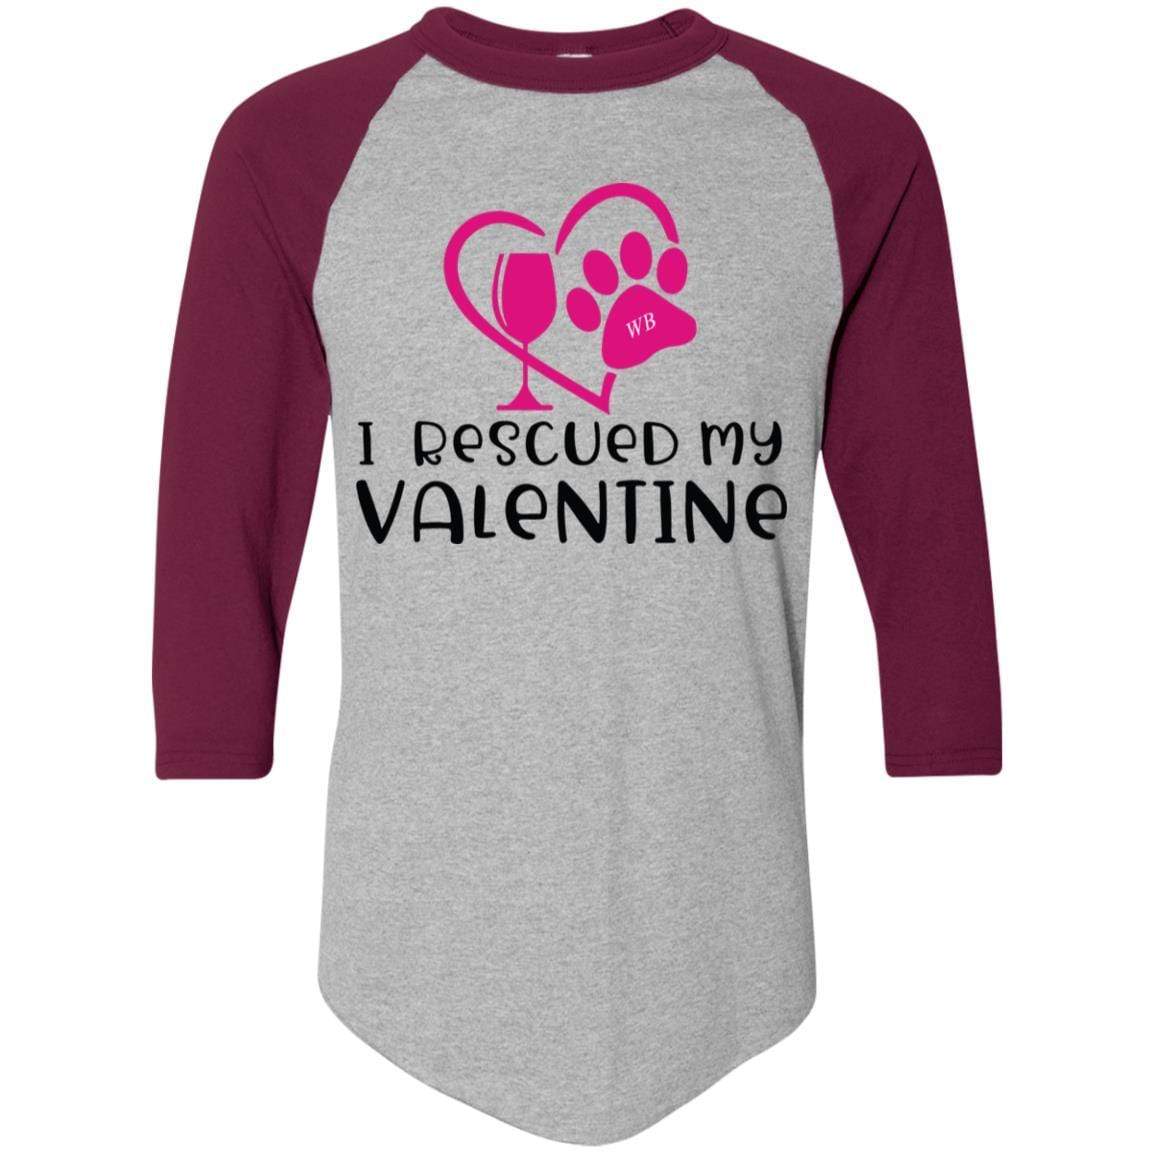 T-Shirts Athletic Heather/Maroon / S Winey Bitches Co "I Rescued My Valentine" Colorblock Raglan Jersey WineyBitchesCo